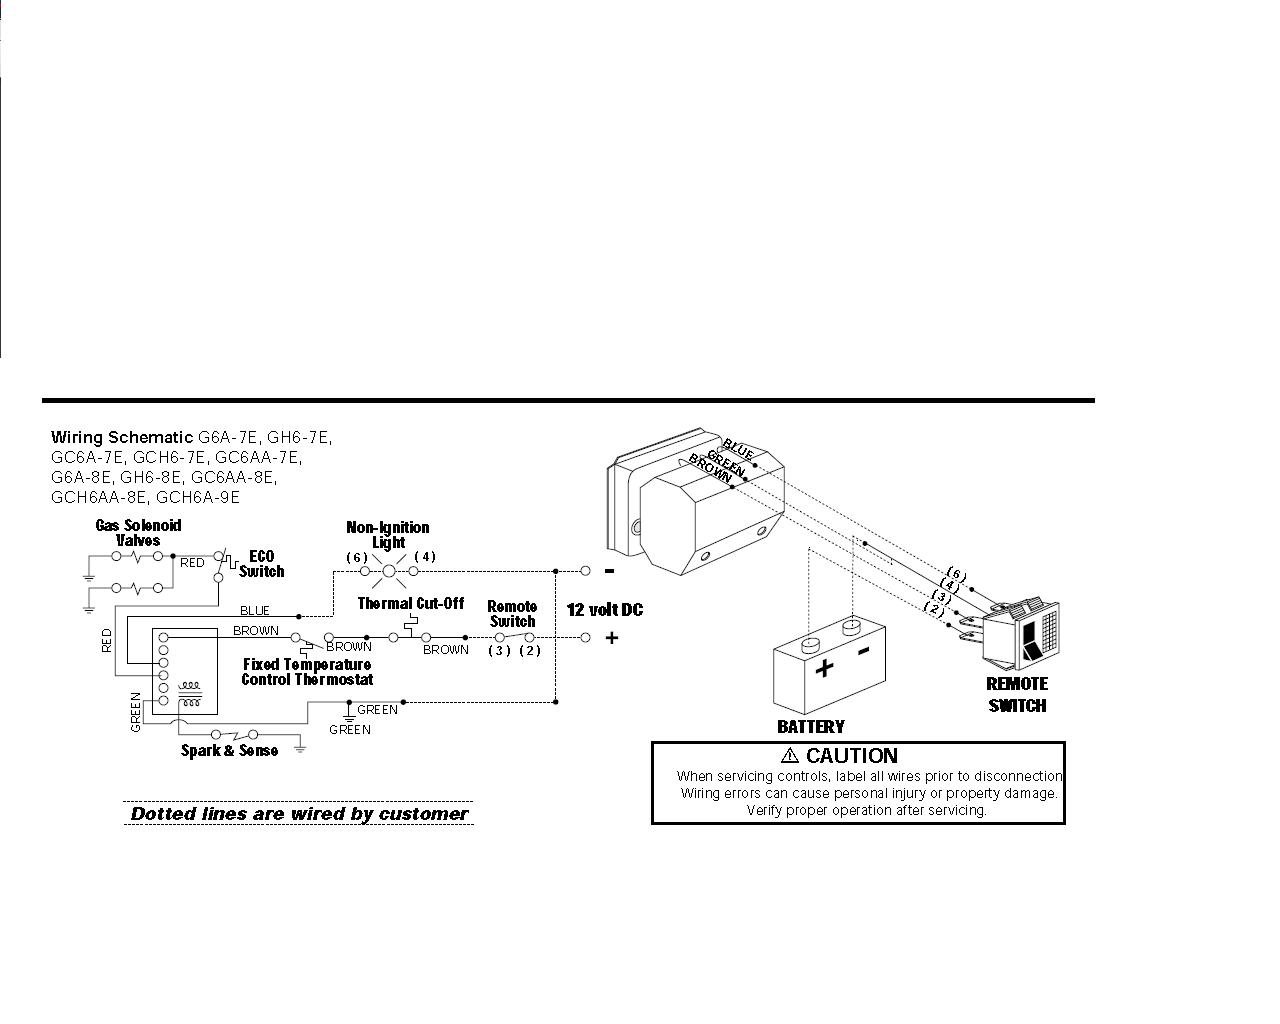 Water Heater Wiring Diagram Instructions For Converting Gc10A-3E To Gc10A-4E from schematron.org